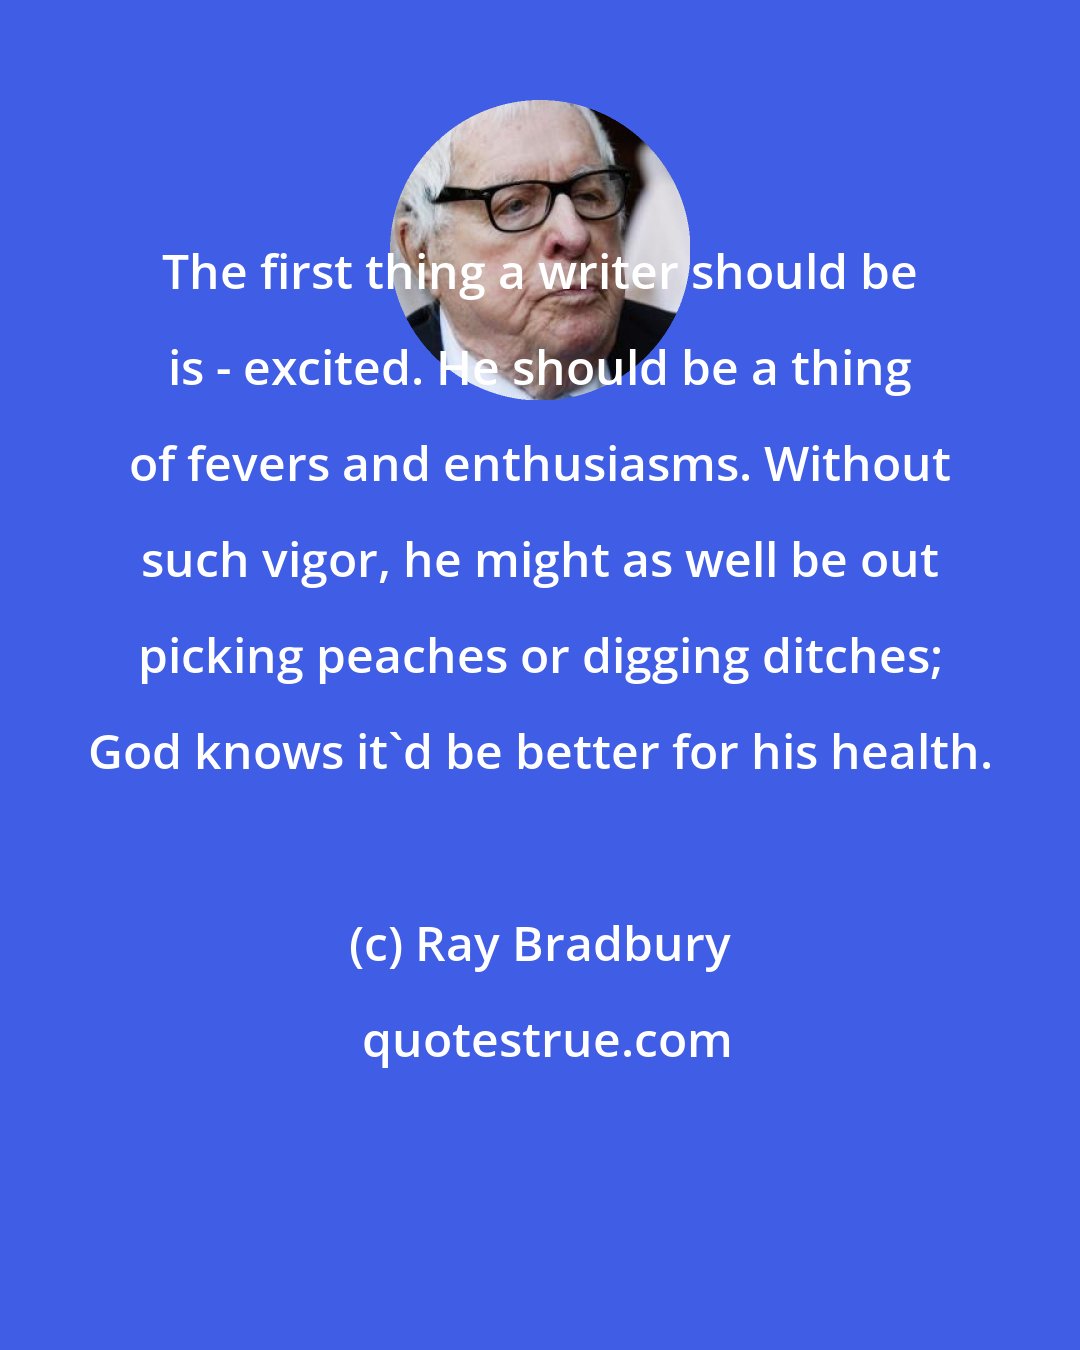 Ray Bradbury: The first thing a writer should be is - excited. He should be a thing of fevers and enthusiasms. Without such vigor, he might as well be out picking peaches or digging ditches; God knows it'd be better for his health.